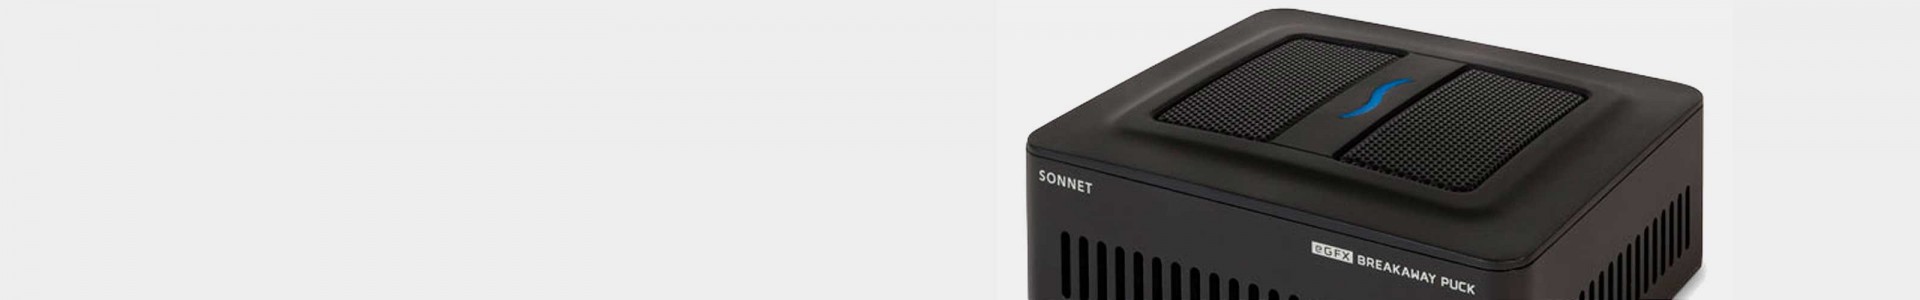 Sonnet Expansion Systems for Mac and PC - Avacab